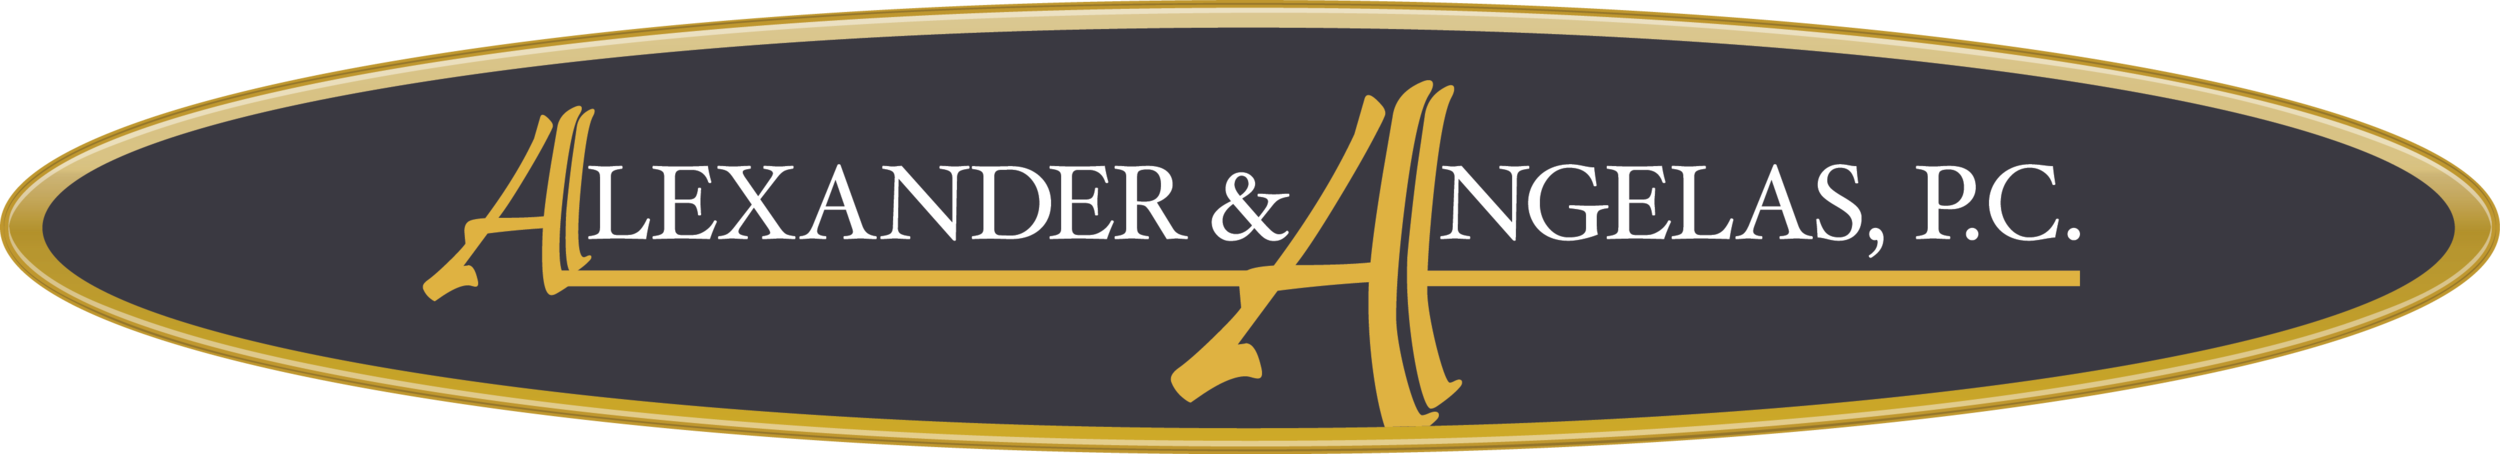 Alexander &amp; Angelas, P.C. | Attorneys and Counselors | Michigan